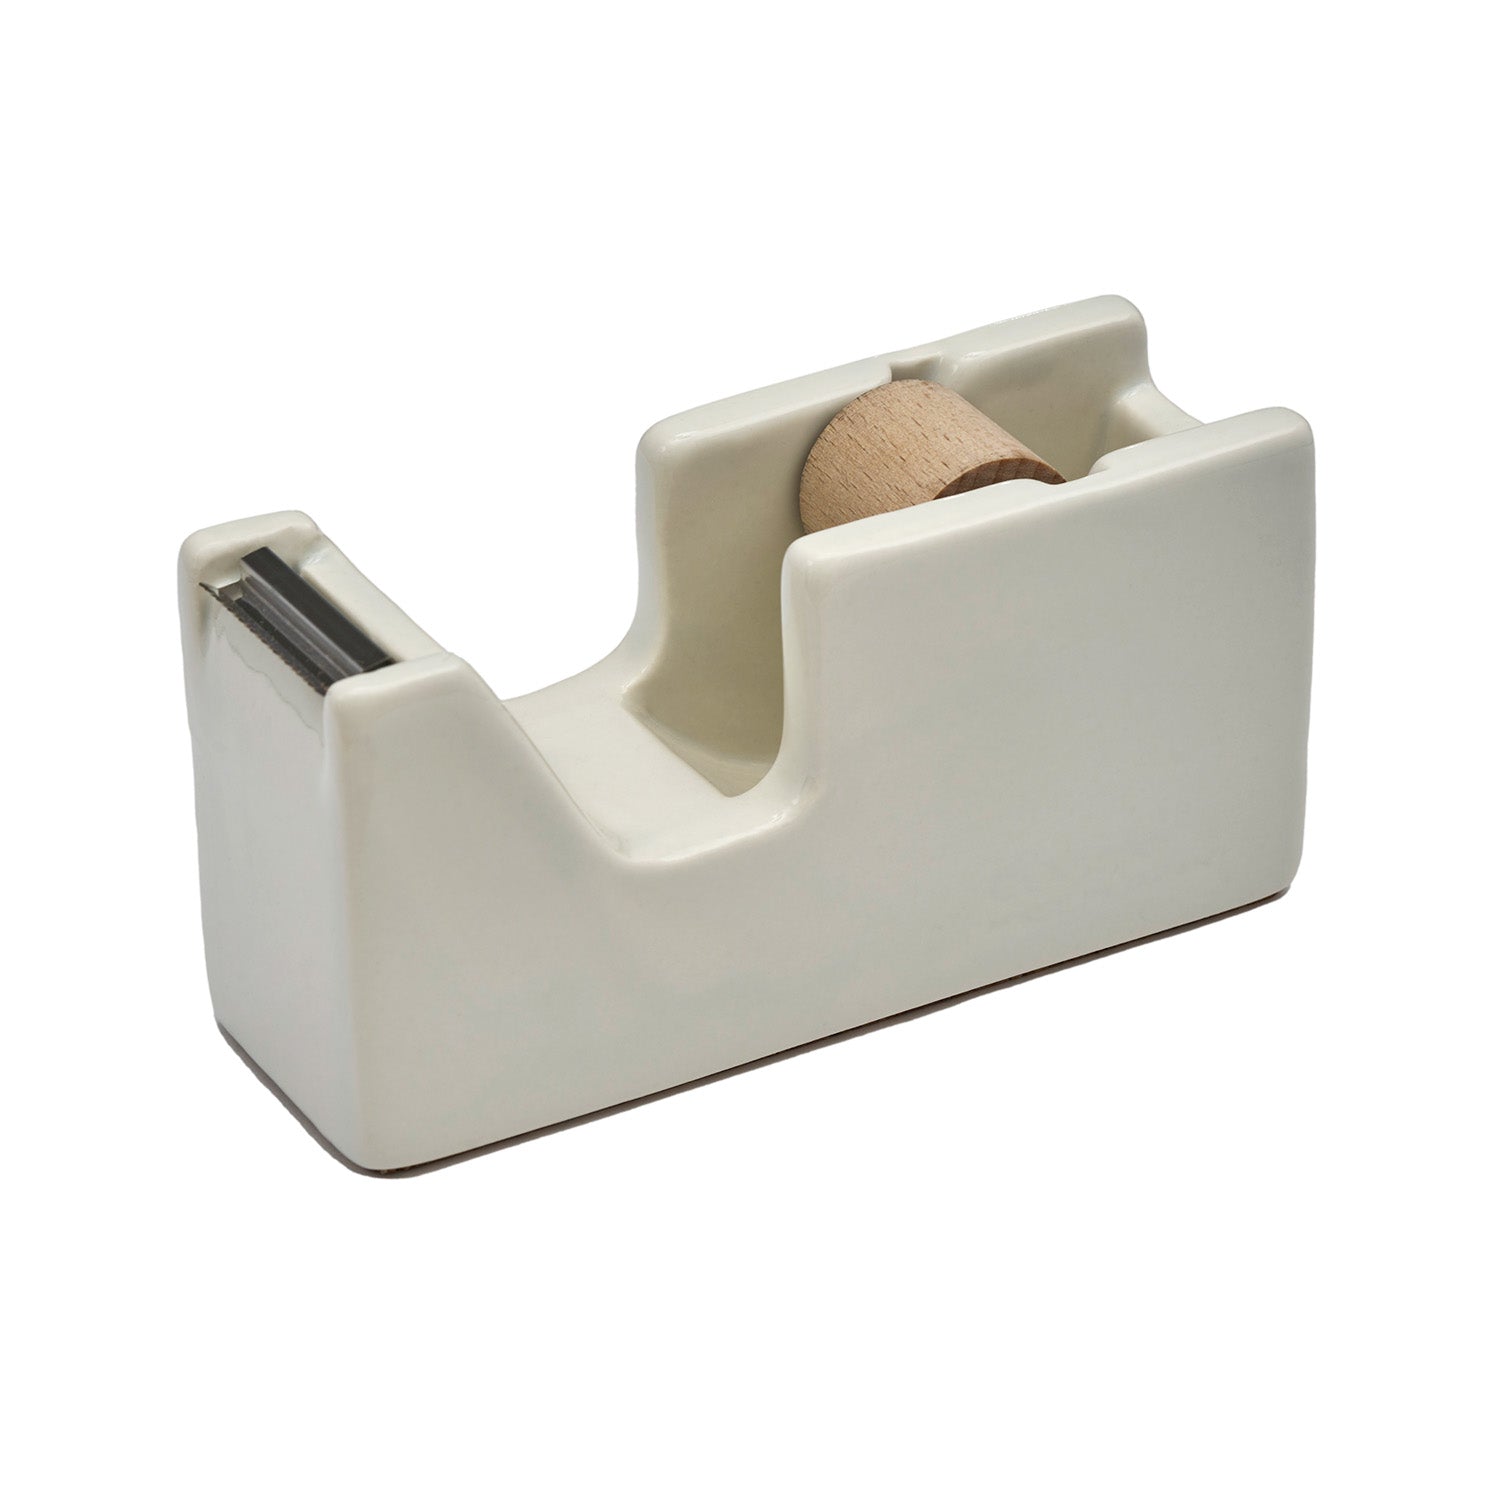 Classiky Porcelain Tape Dispenser - White made in Japan angle